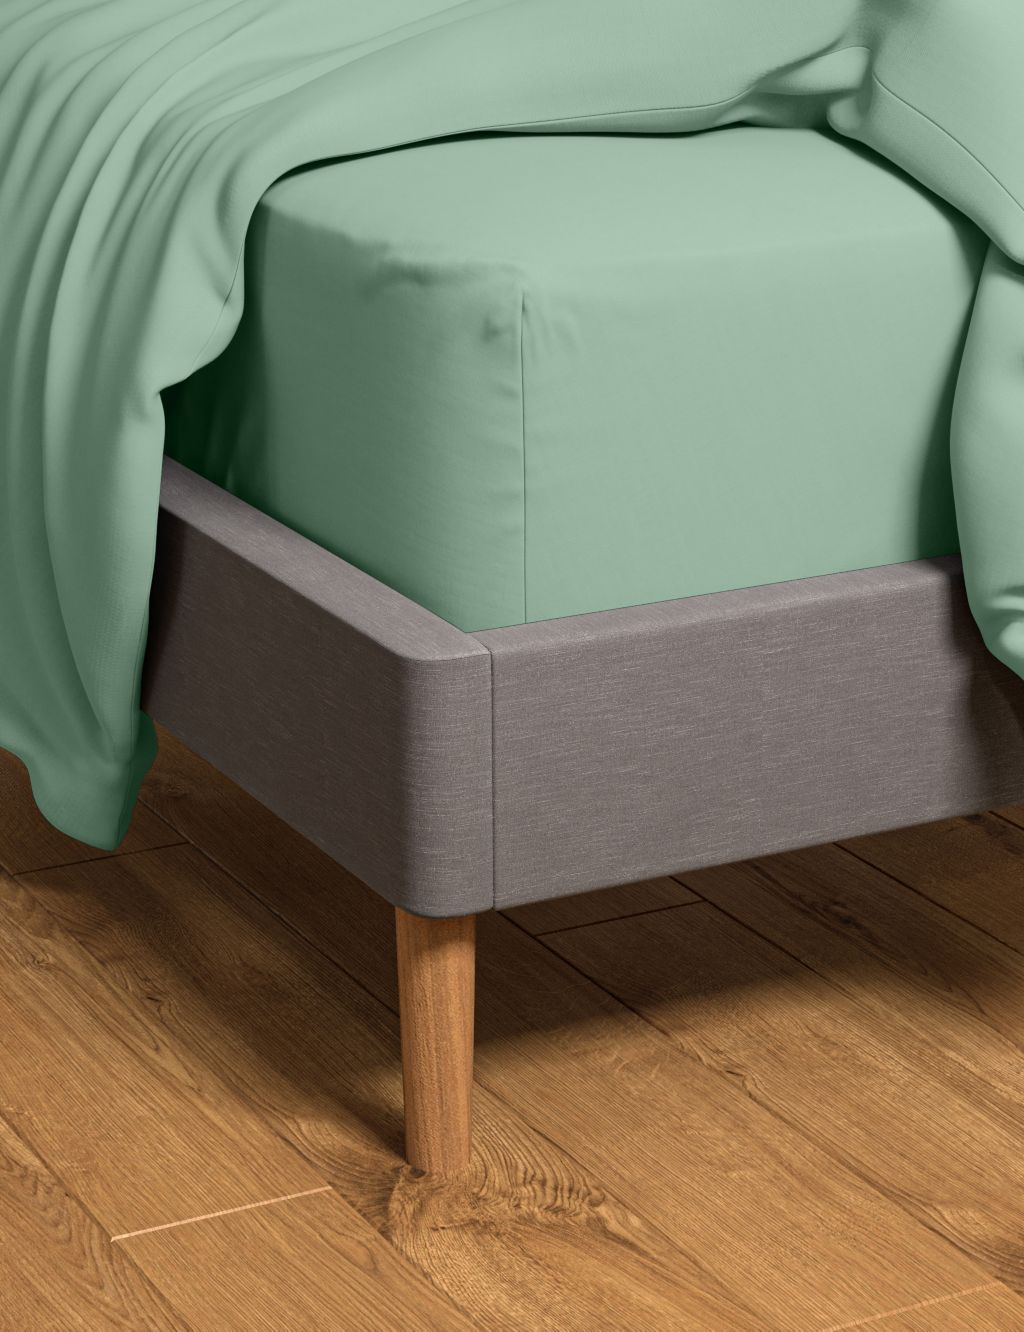 Comfortably Cool Lyocel Rich Deep Fitted Sheet image 2